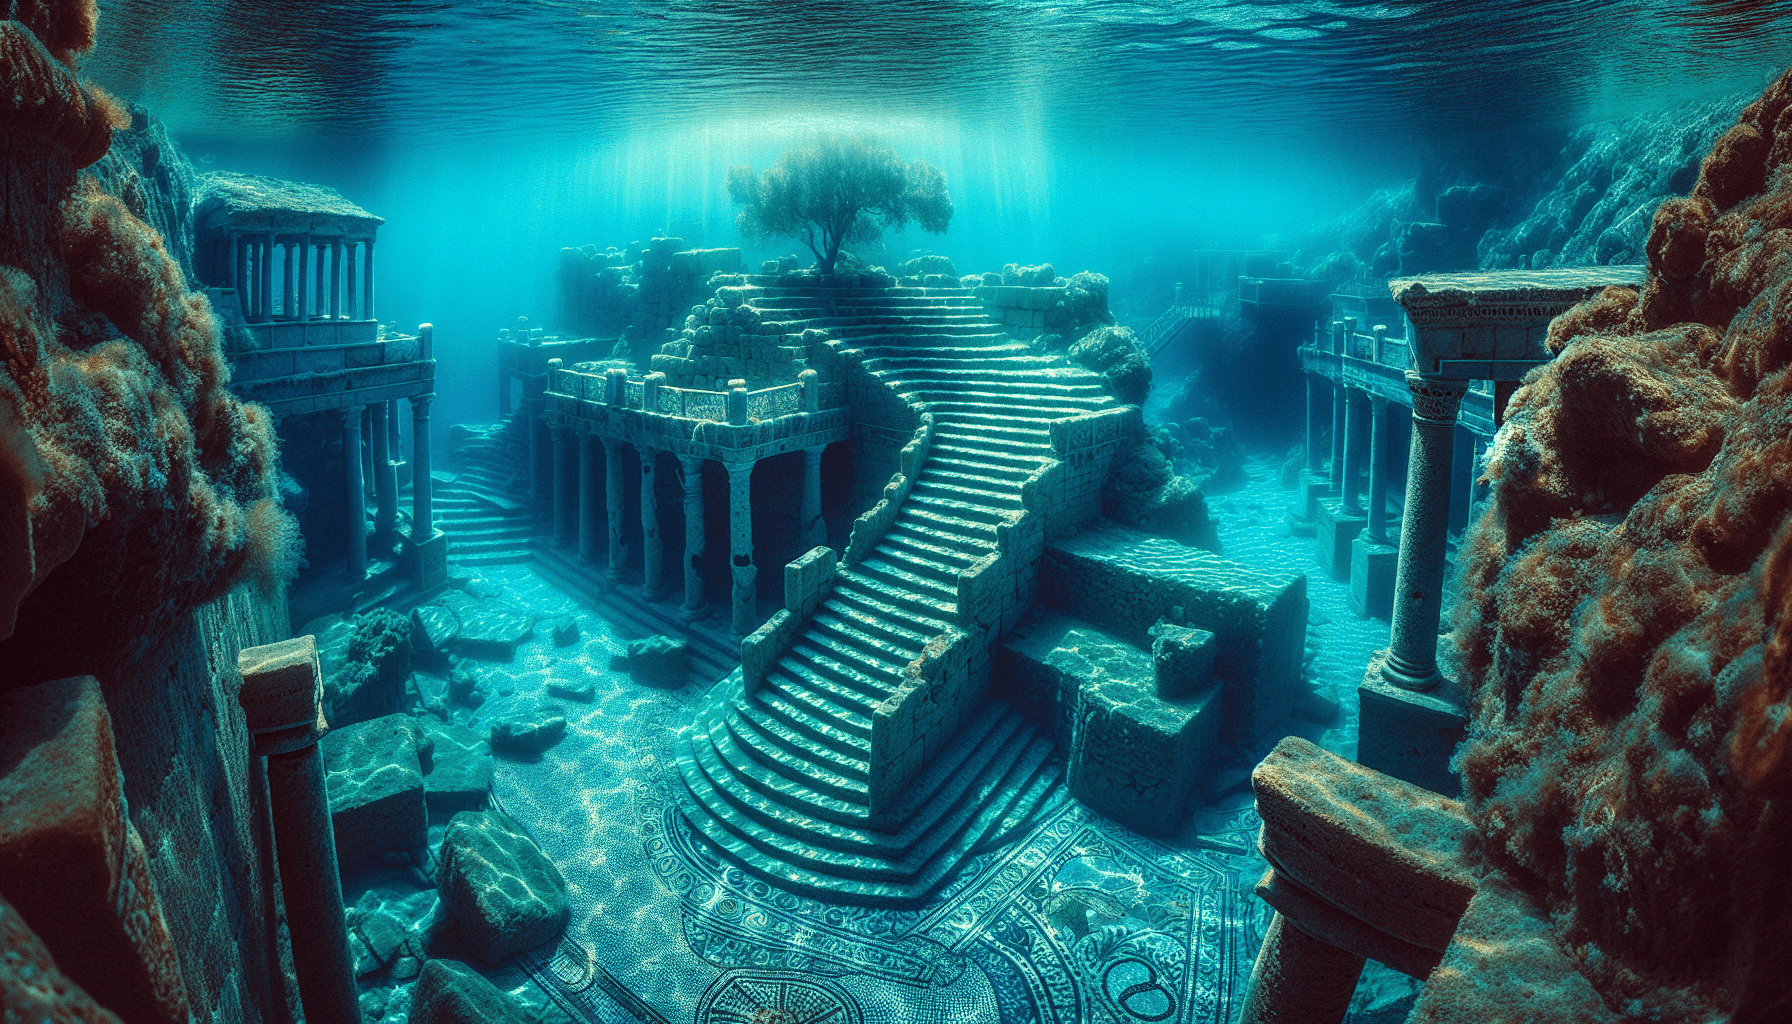 An underwater scene depicting ancient ruins with columns and staircases surrounded by marine life, illuminated by light filtering through the water.